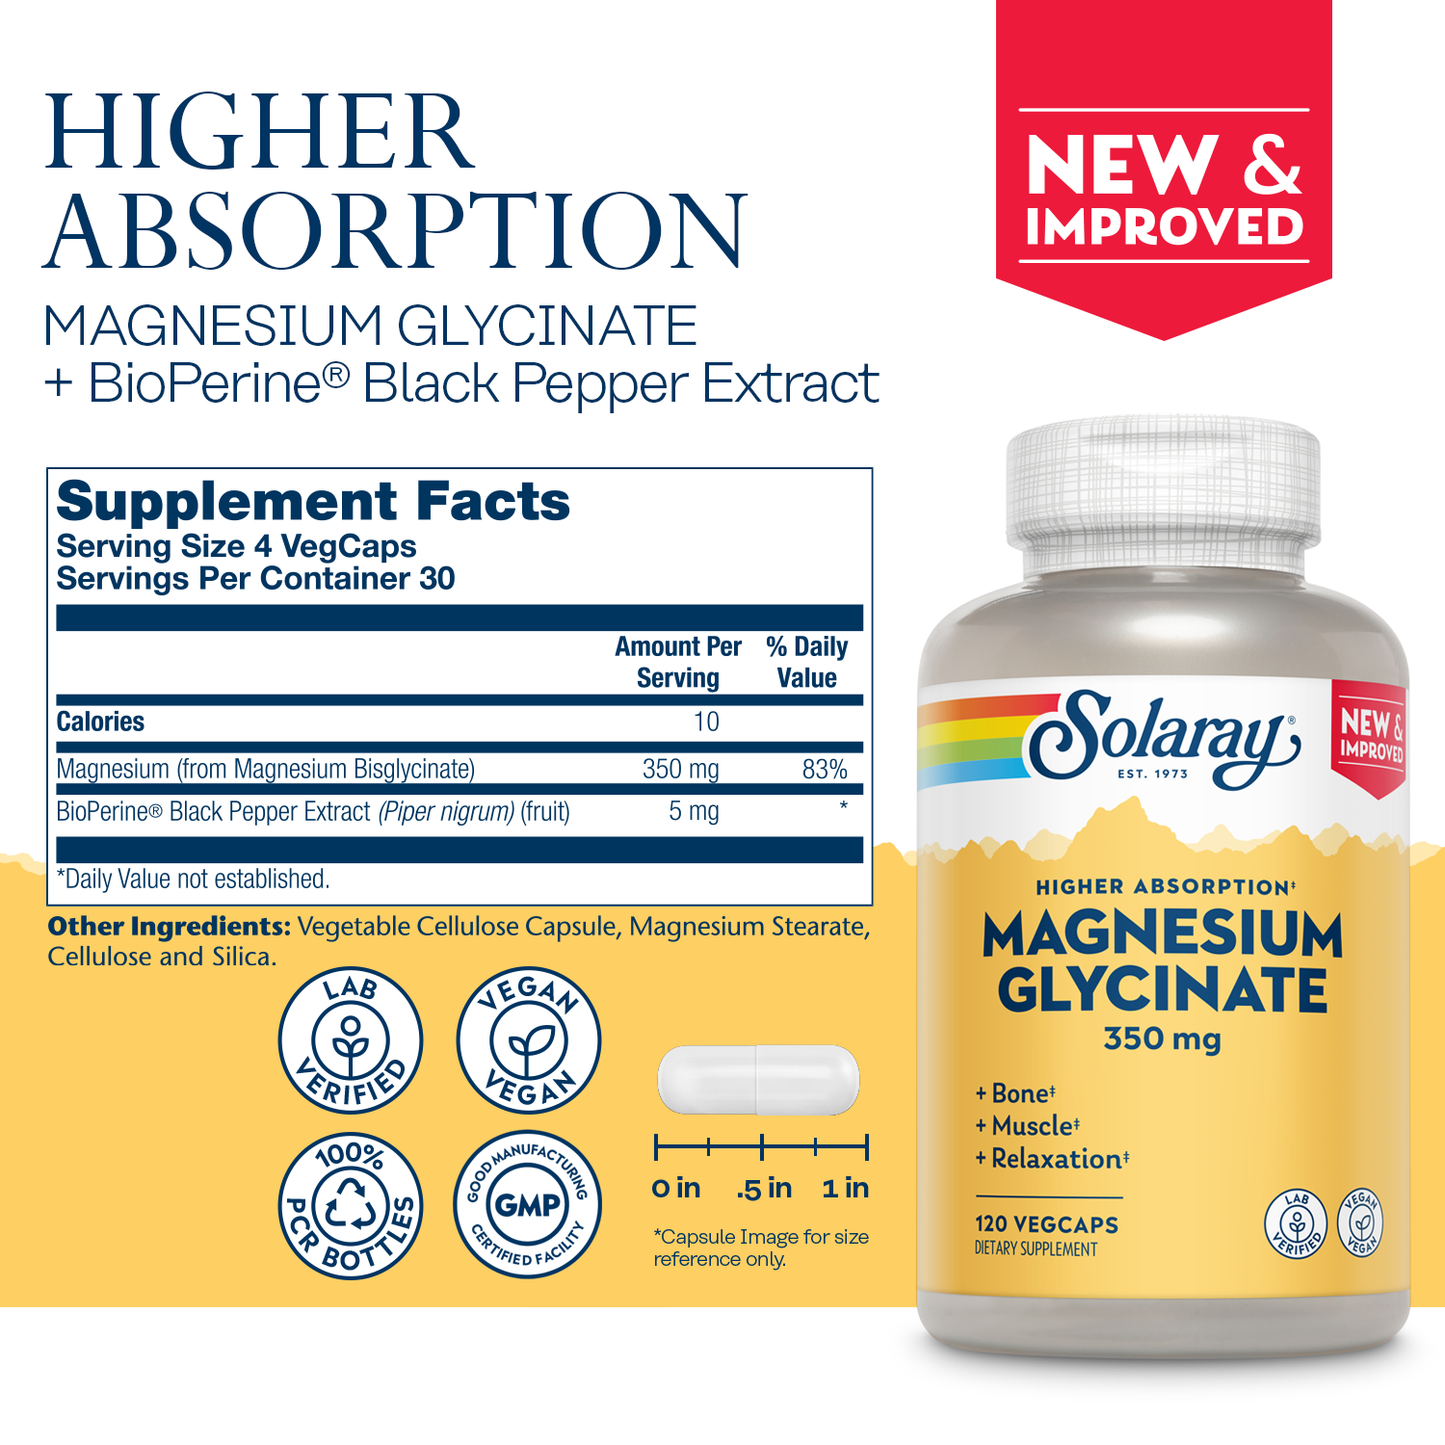 Solaray Magnesium Glycinate Capsules, Fully Chelated Magnesium Bisglycinate with BioPerine, High Absorption Magnesium Supplement, Stress, Bones, Muscle & Relaxation Support, 60 Day Guarantee, Non-GMO, 68 Servings, 275 VegCaps